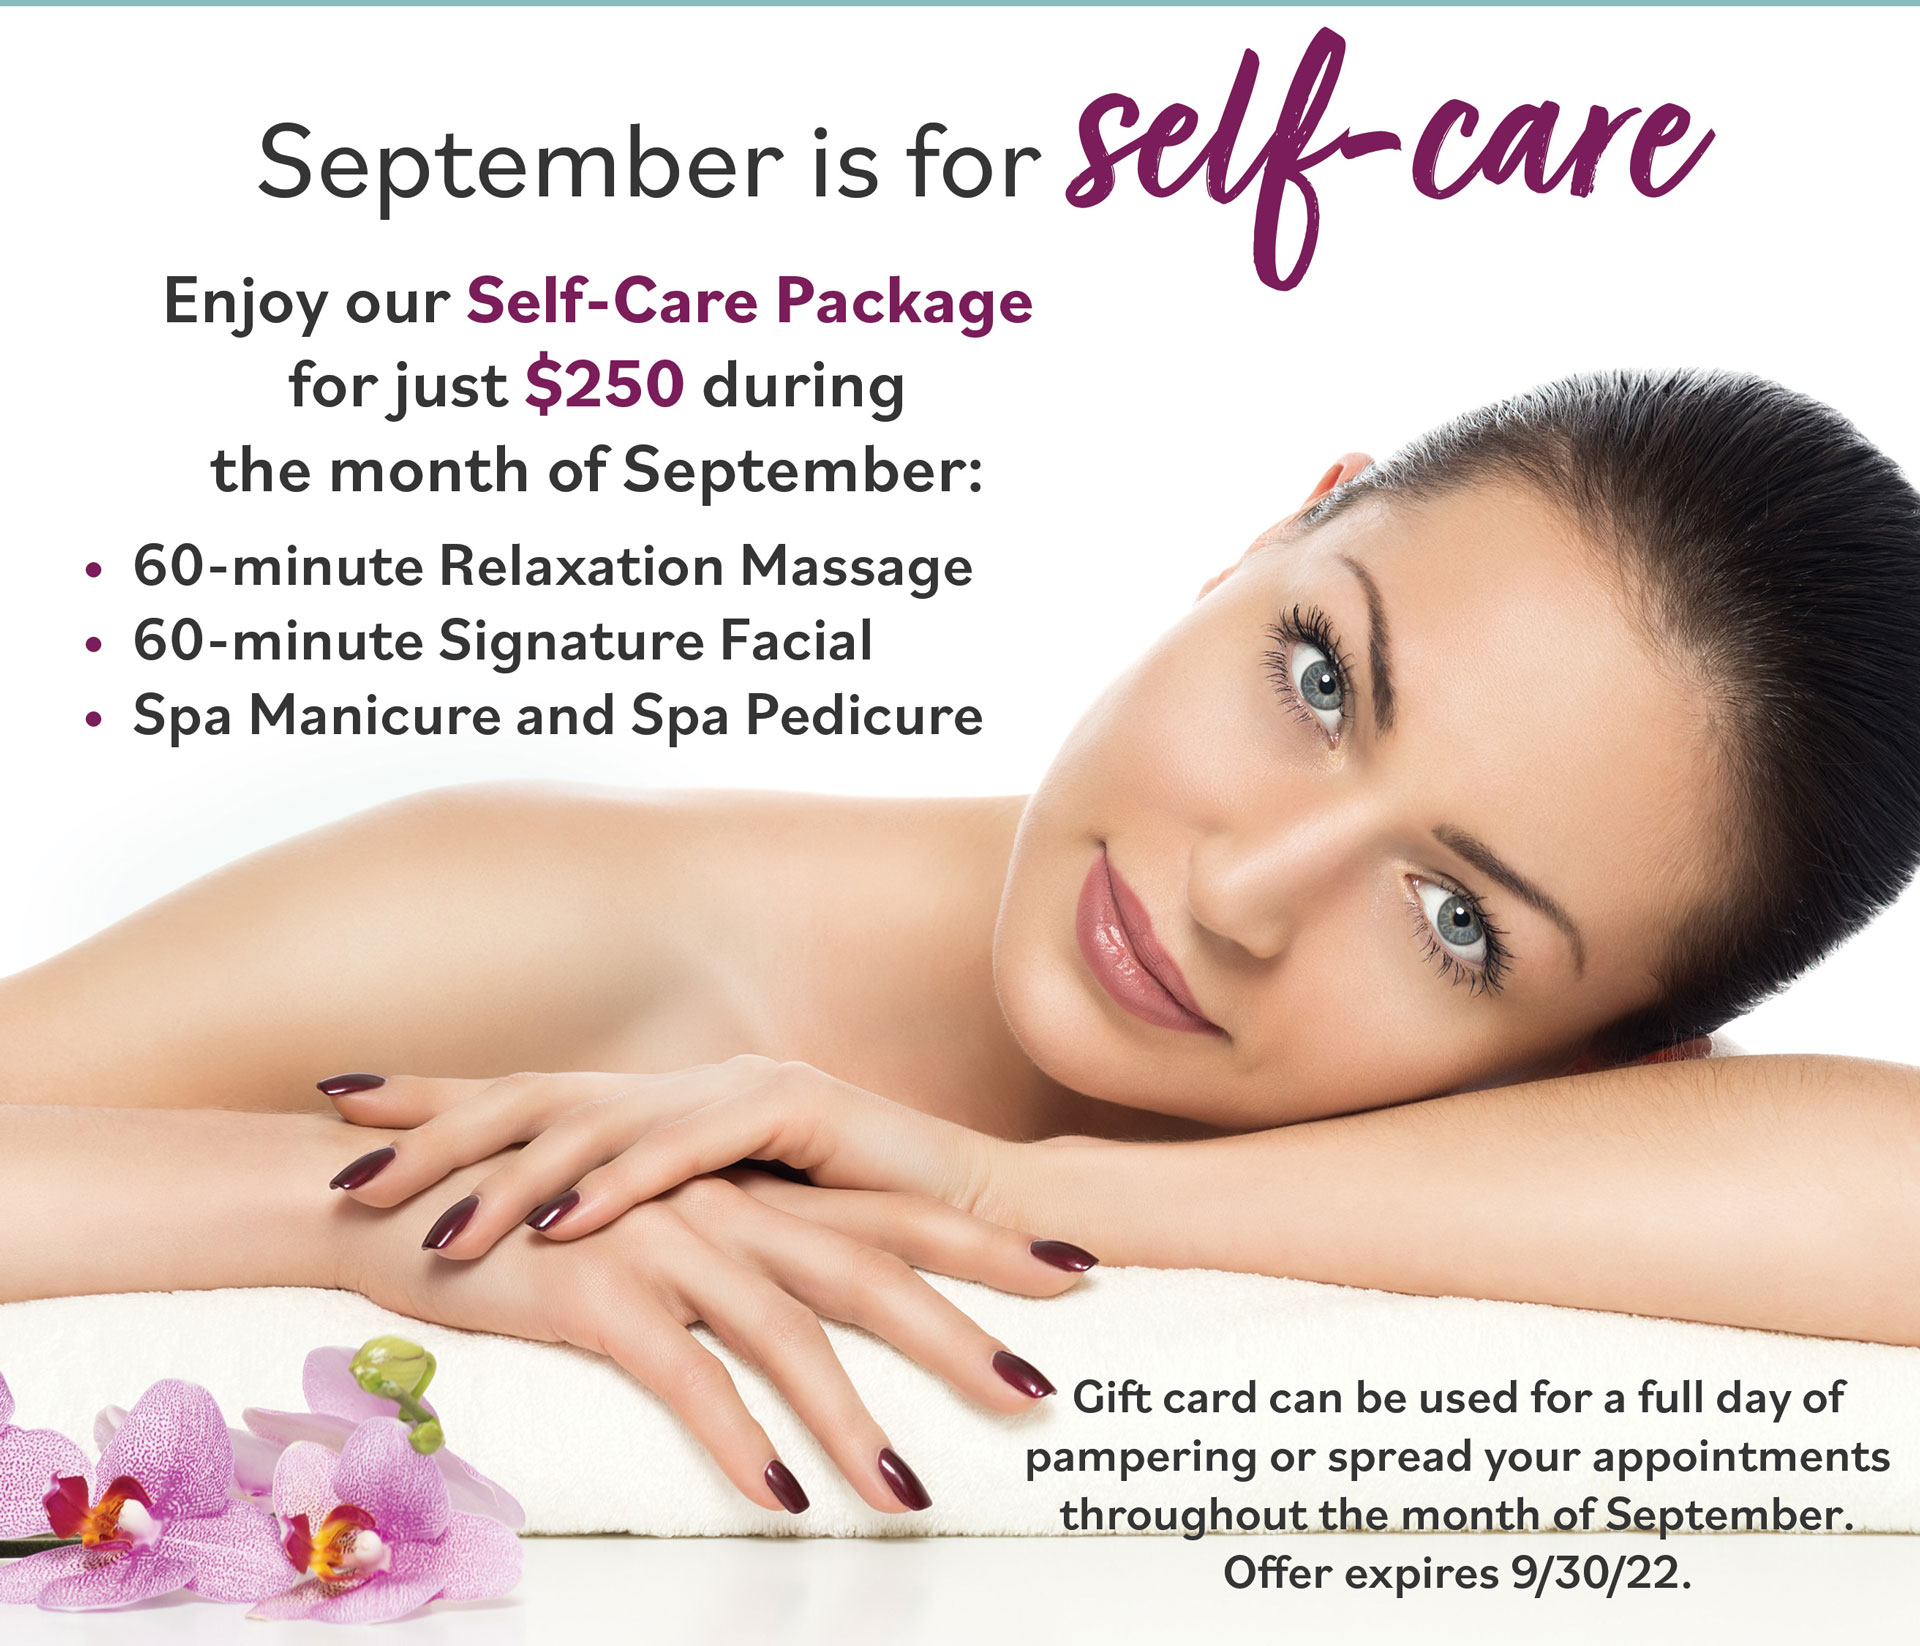 September is for self-care. Enjoy our Self-Care Package for just $250 during the month of September: 60 Minute Relaxation Massage. 60 Minute Signature Facial. Spa Manicure and Spa Pedicure. Gift card can be used for a full day of pampering or spread your appointments throughout the month of September. Offer expires 9/30/22.